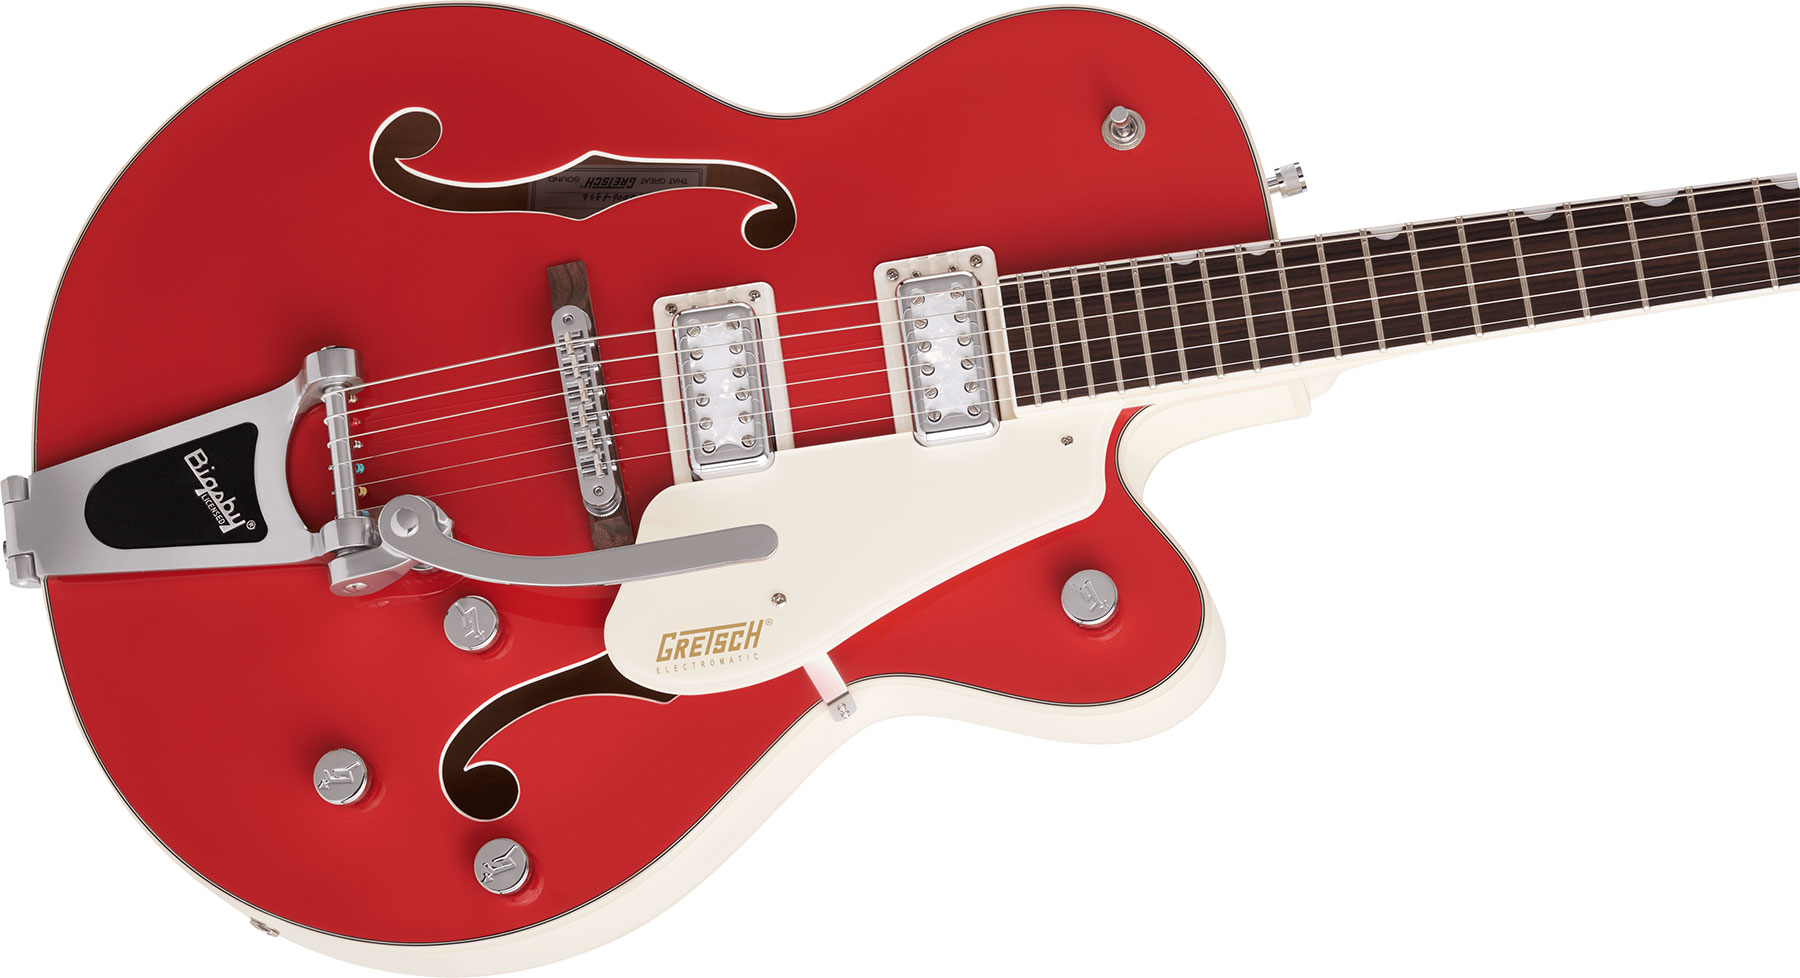 Gretsch G5410t Tri-five Electromatic Hollow Hh Bigsby Rw - 2-tone Fiesta Red On Vintage White - Guitare Électrique 1/2 Caisse - Variation 2